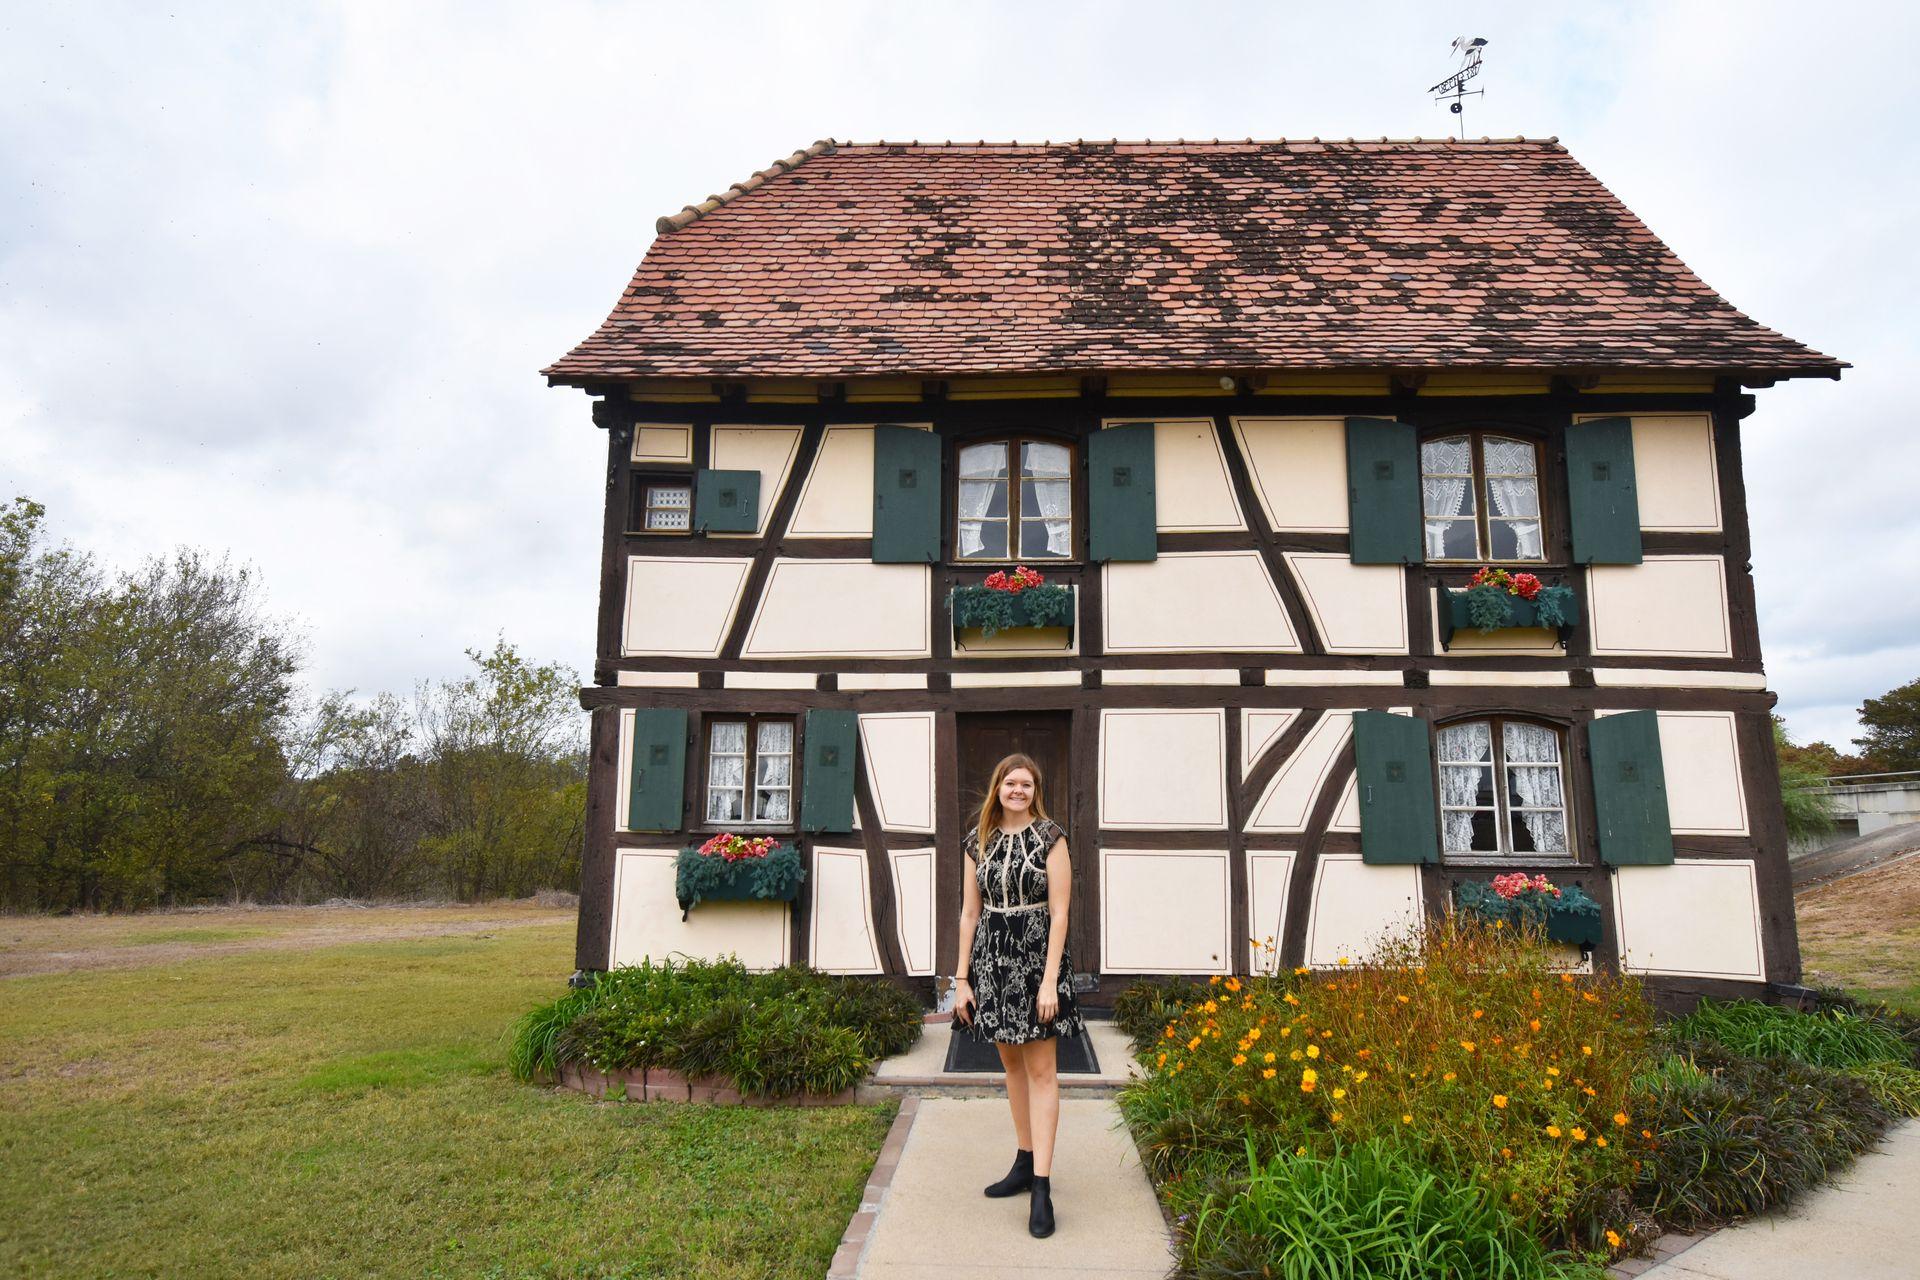 Lydia standing in front of the Alsatian Steinbach Haus, which is white with brown wood features.